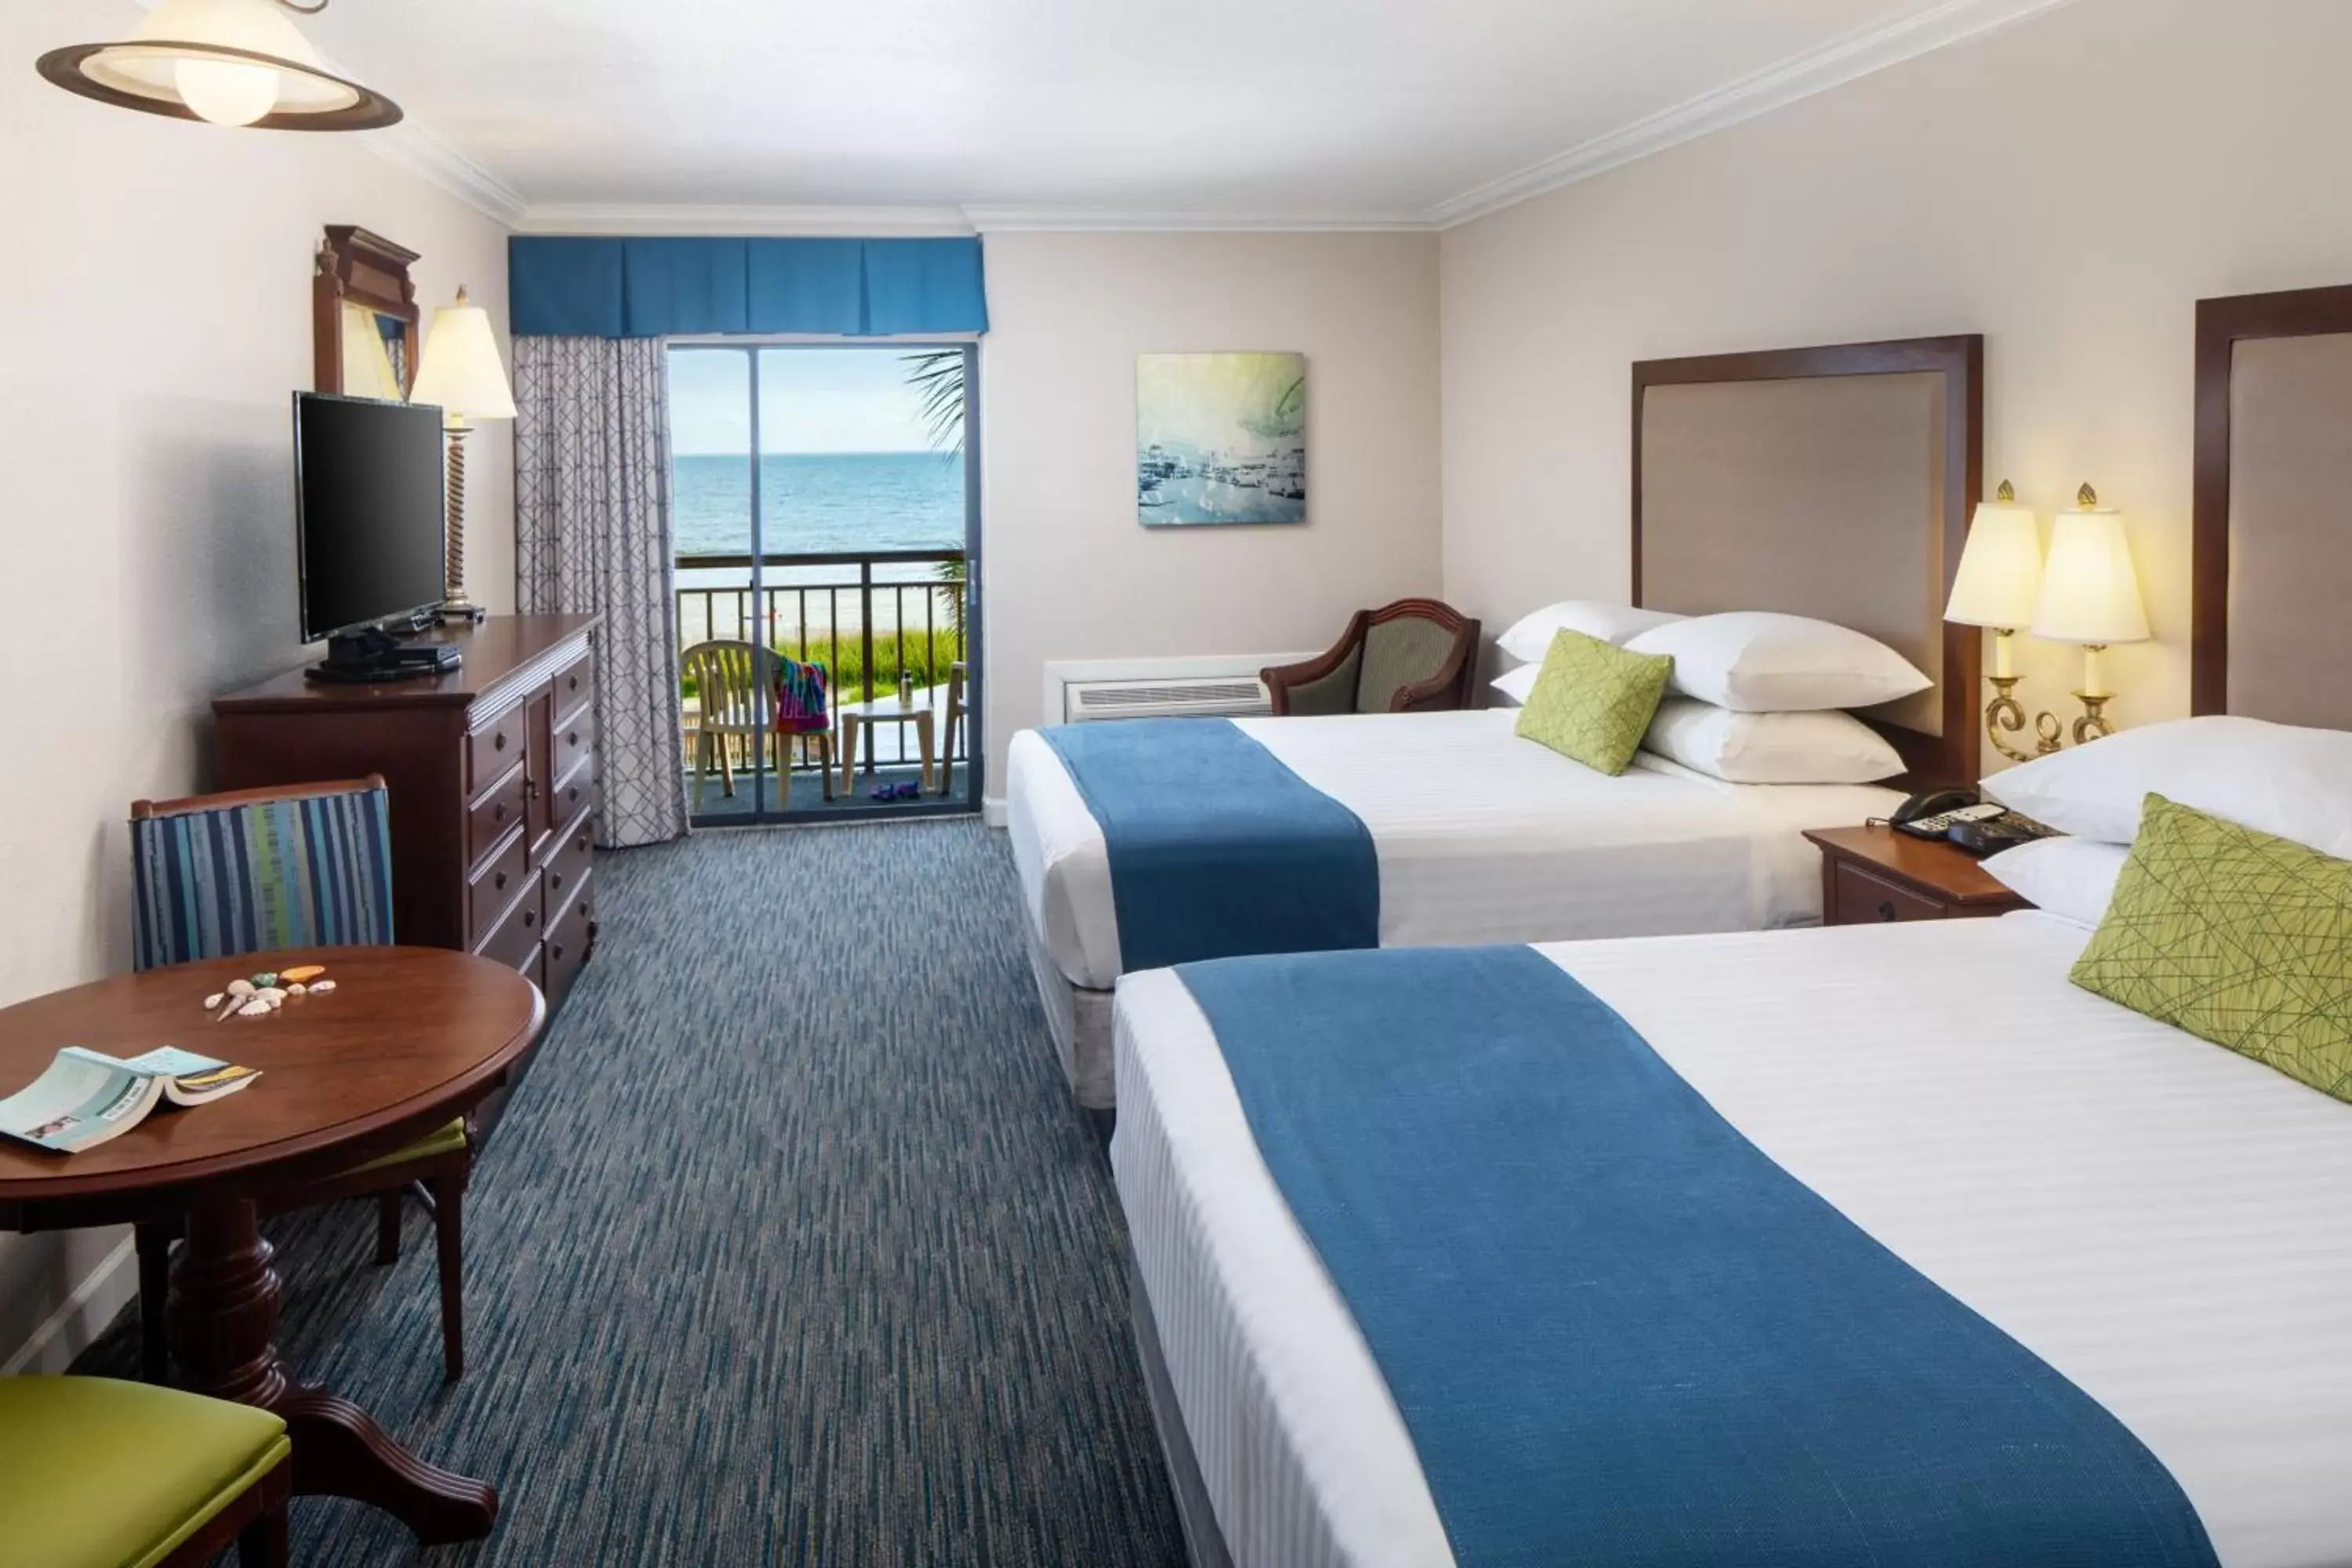 Bedroom in Holiday Inn At the Pavilion - Independent